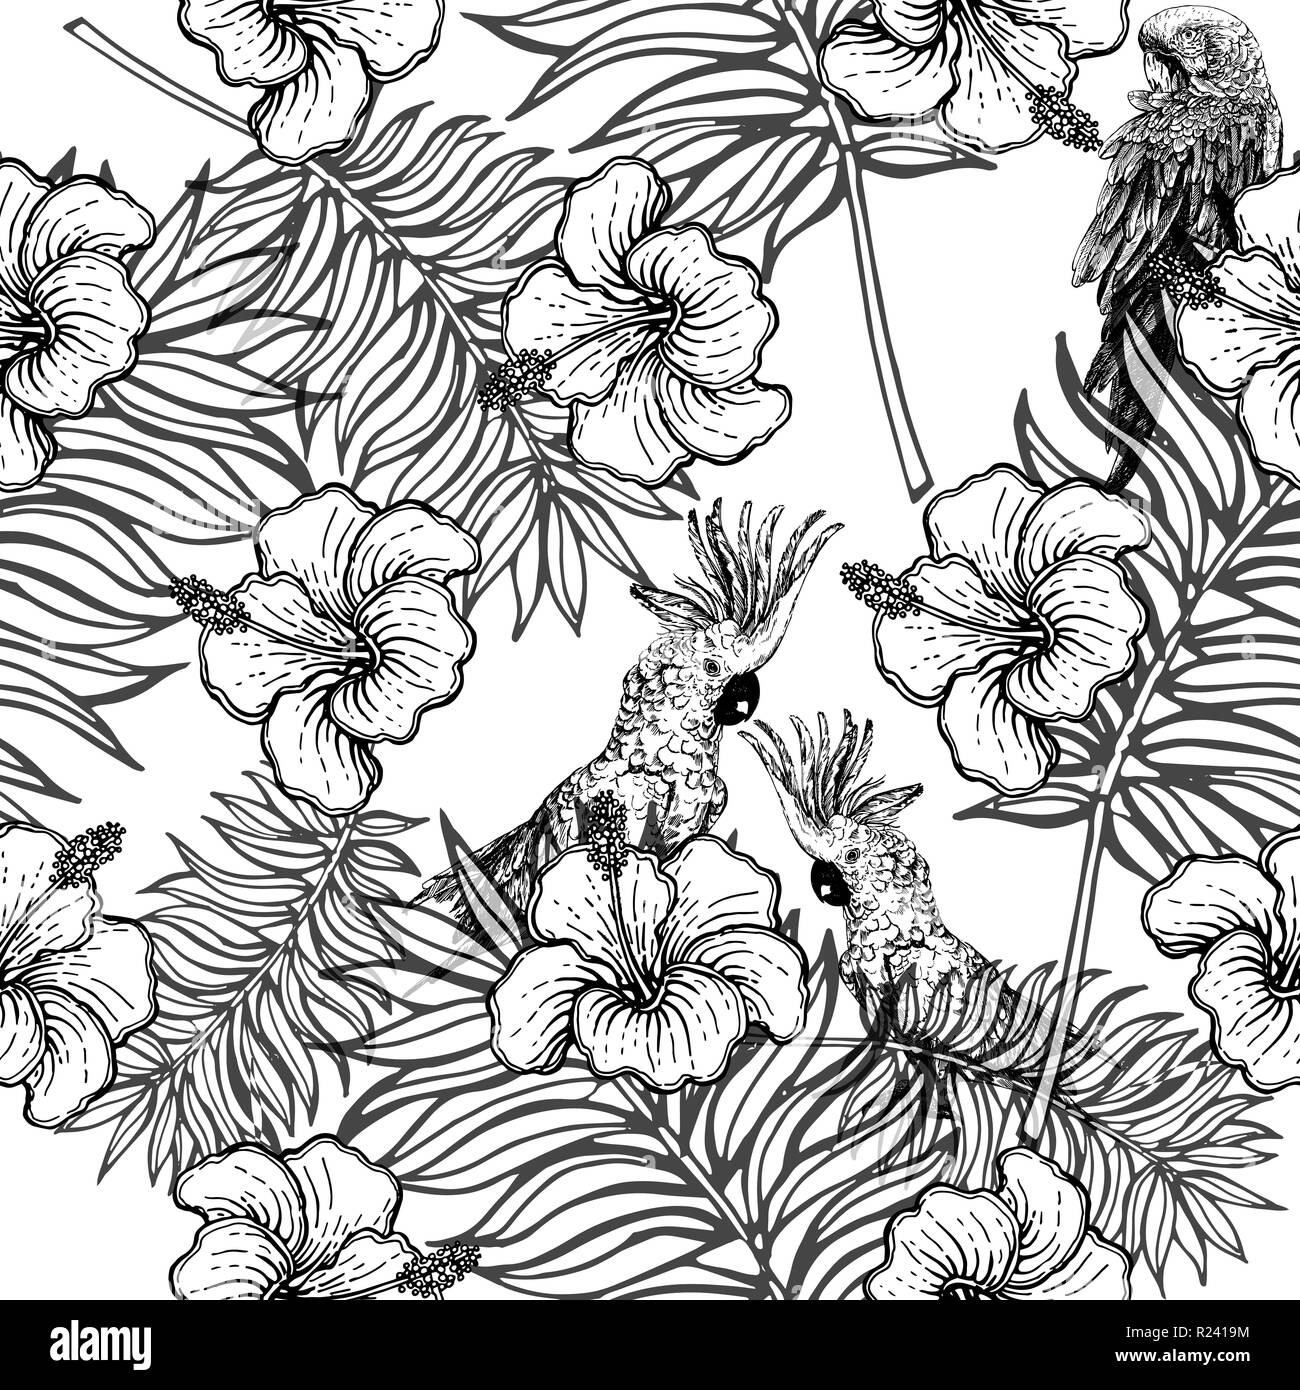 Seamless pattern of hand drawn sketch style flowers and plants isolated on white background. Vector illustration. Stock Vector